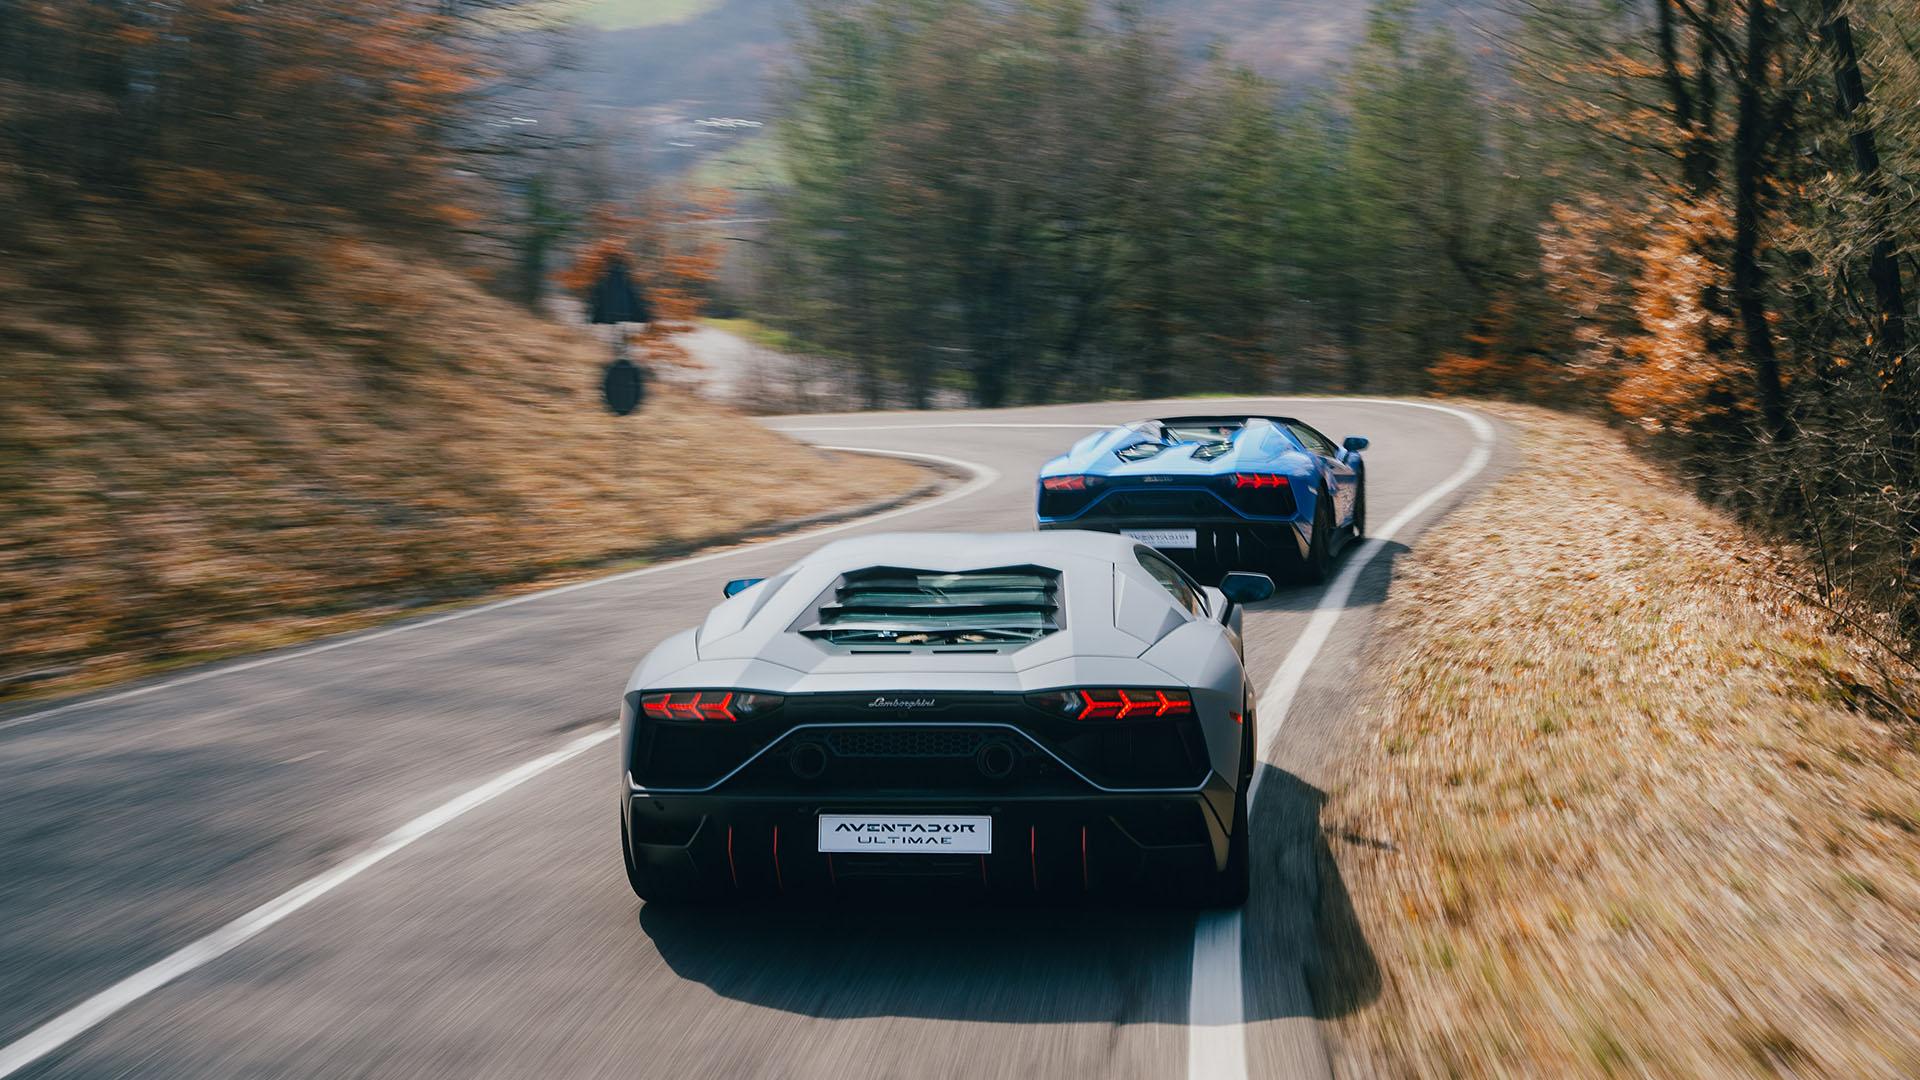 Aventador ultimae on the road 6